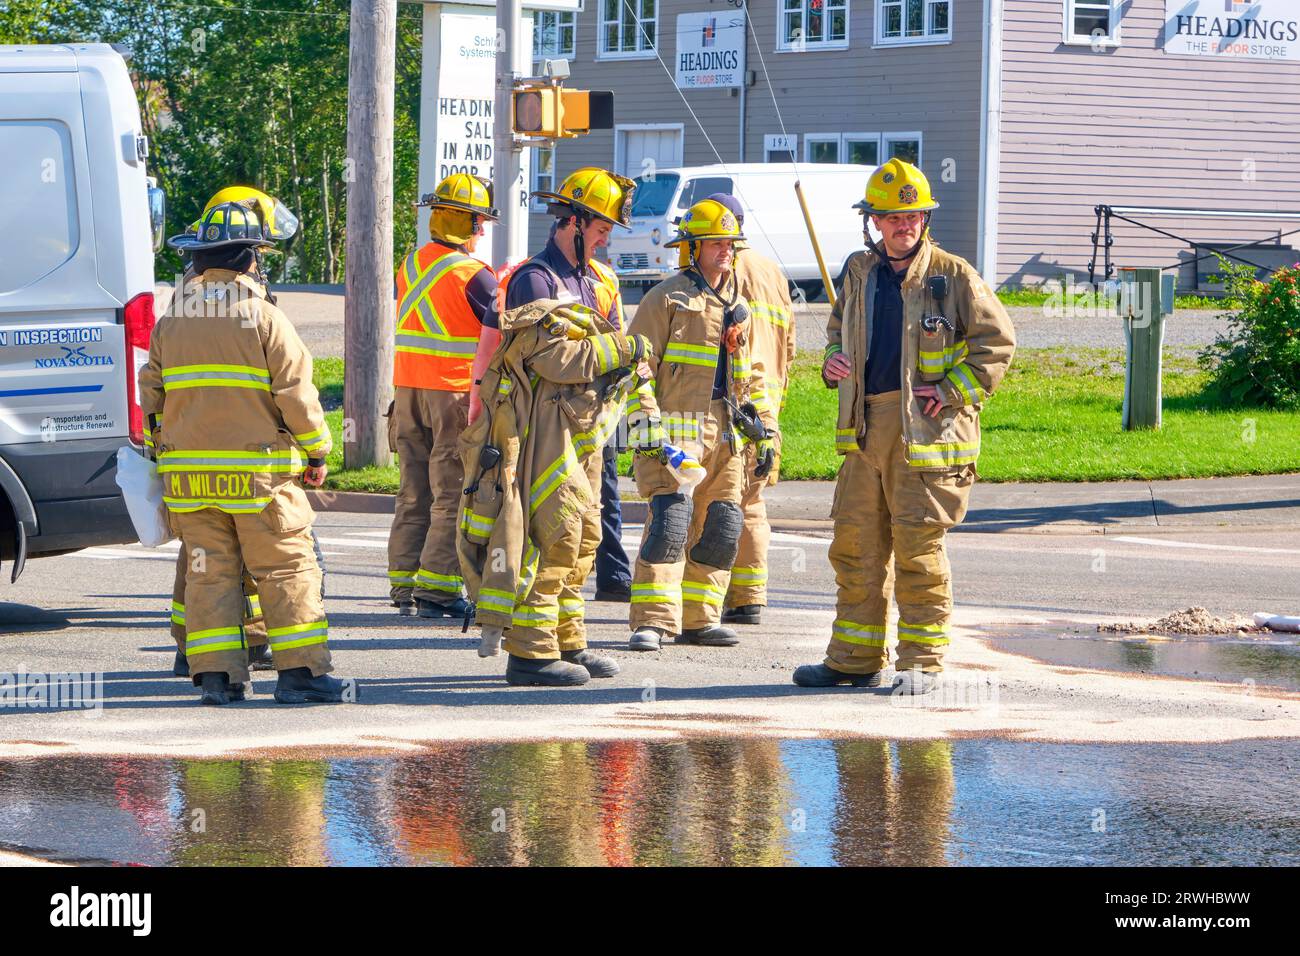 A group of firefighters relax after responding to an emergency call in Sydney Nova Scotia.. Stock Photo